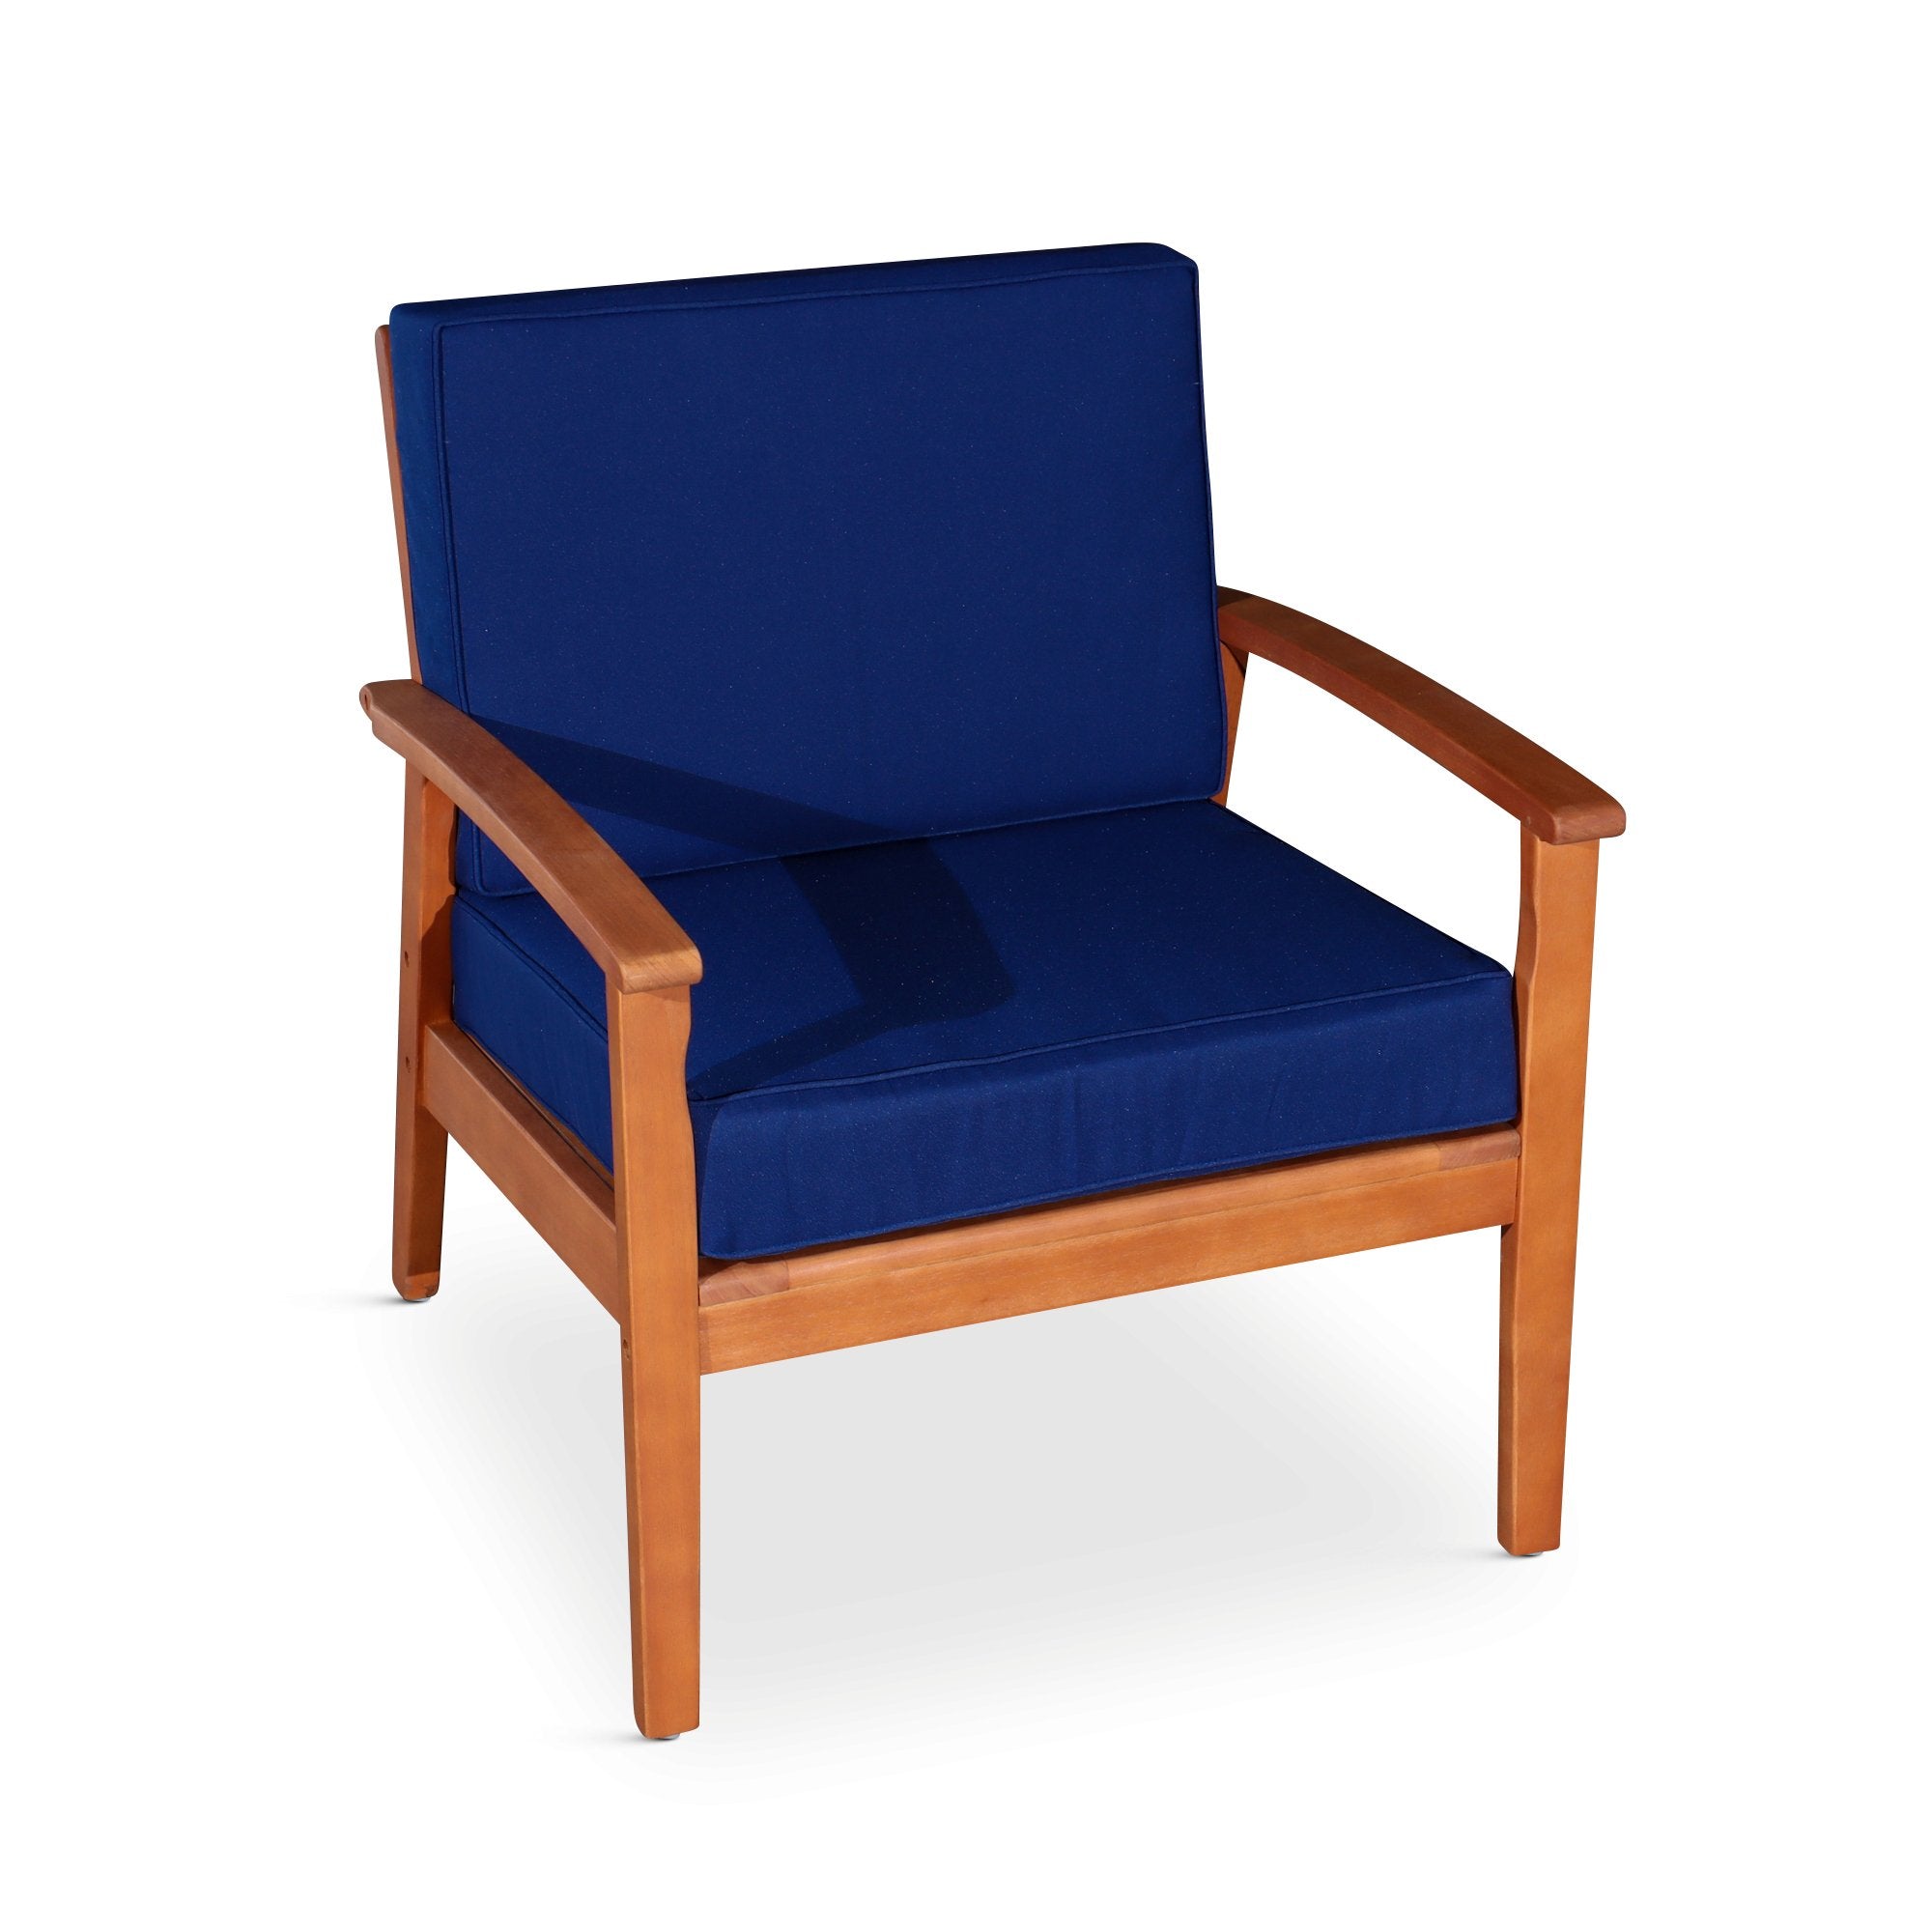 Deep Seat Outdoor Chair, Natural Oil Finish, Navy Cushions - Tuesday Morning-Chairs & Seating